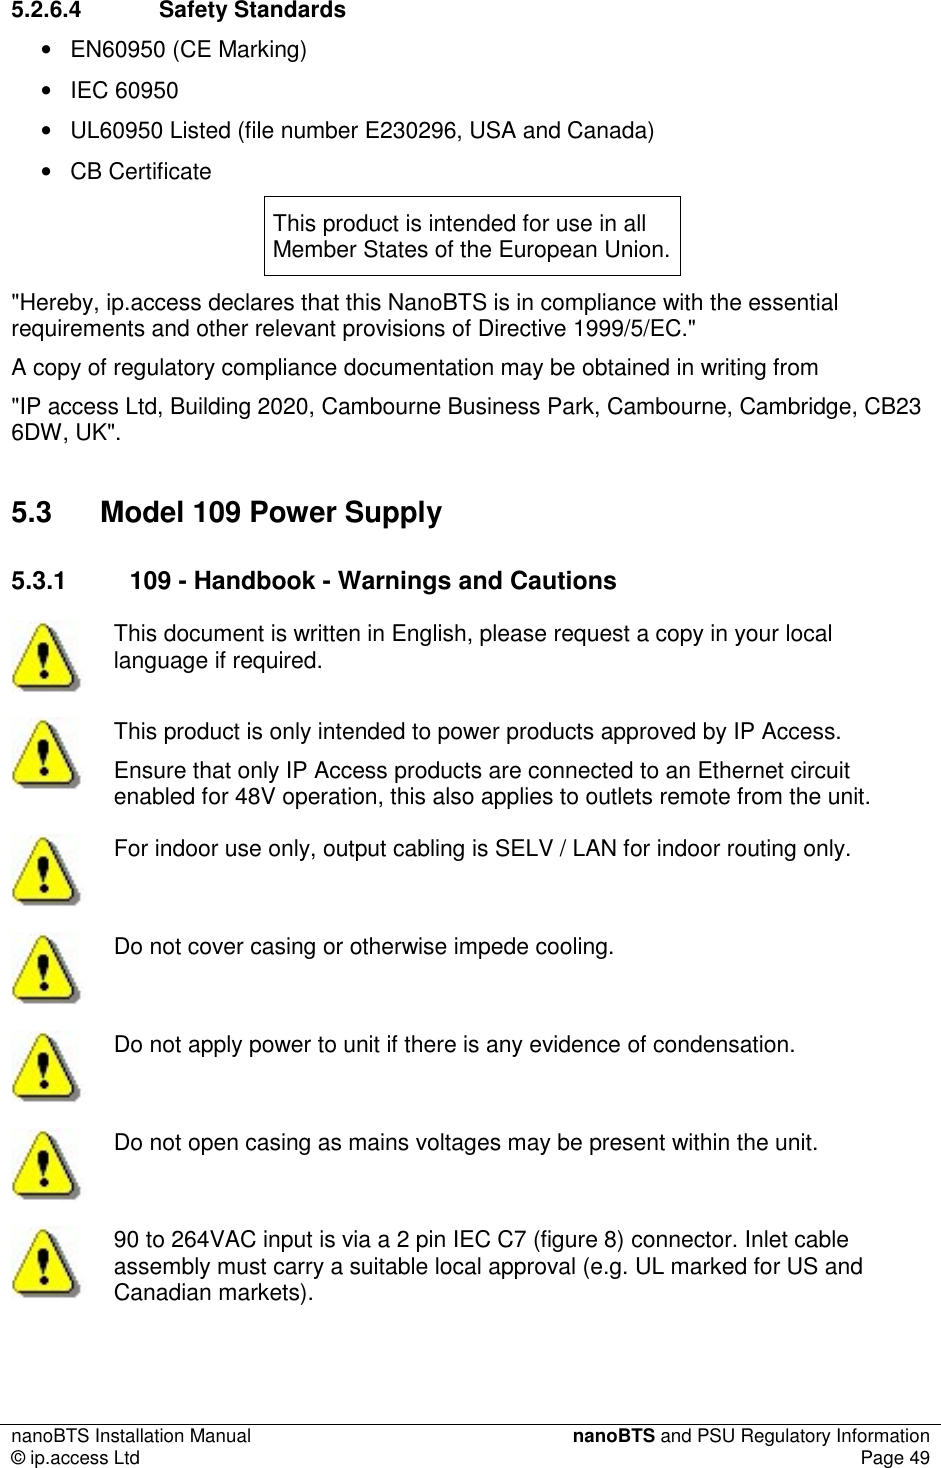 nanoBTS Installation Manual  nanoBTS and PSU Regulatory Information © ip.access Ltd  Page 49  5.2.6.4  Safety Standards •  EN60950 (CE Marking) •  IEC 60950 •  UL60950 Listed (file number E230296, USA and Canada) •  CB Certificate This product is intended for use in all Member States of the European Union. &quot;Hereby, ip.access declares that this NanoBTS is in compliance with the essential requirements and other relevant provisions of Directive 1999/5/EC.&quot; A copy of regulatory compliance documentation may be obtained in writing from &quot;IP access Ltd, Building 2020, Cambourne Business Park, Cambourne, Cambridge, CB23 6DW, UK&quot;. 5.3  Model 109 Power Supply 5.3.1  109 - Handbook - Warnings and Cautions  This document is written in English, please request a copy in your local language if required.  This product is only intended to power products approved by IP Access. Ensure that only IP Access products are connected to an Ethernet circuit enabled for 48V operation, this also applies to outlets remote from the unit.  For indoor use only, output cabling is SELV / LAN for indoor routing only.  Do not cover casing or otherwise impede cooling.  Do not apply power to unit if there is any evidence of condensation.  Do not open casing as mains voltages may be present within the unit.  90 to 264VAC input is via a 2 pin IEC C7 (figure 8) connector. Inlet cable assembly must carry a suitable local approval (e.g. UL marked for US and Canadian markets). 